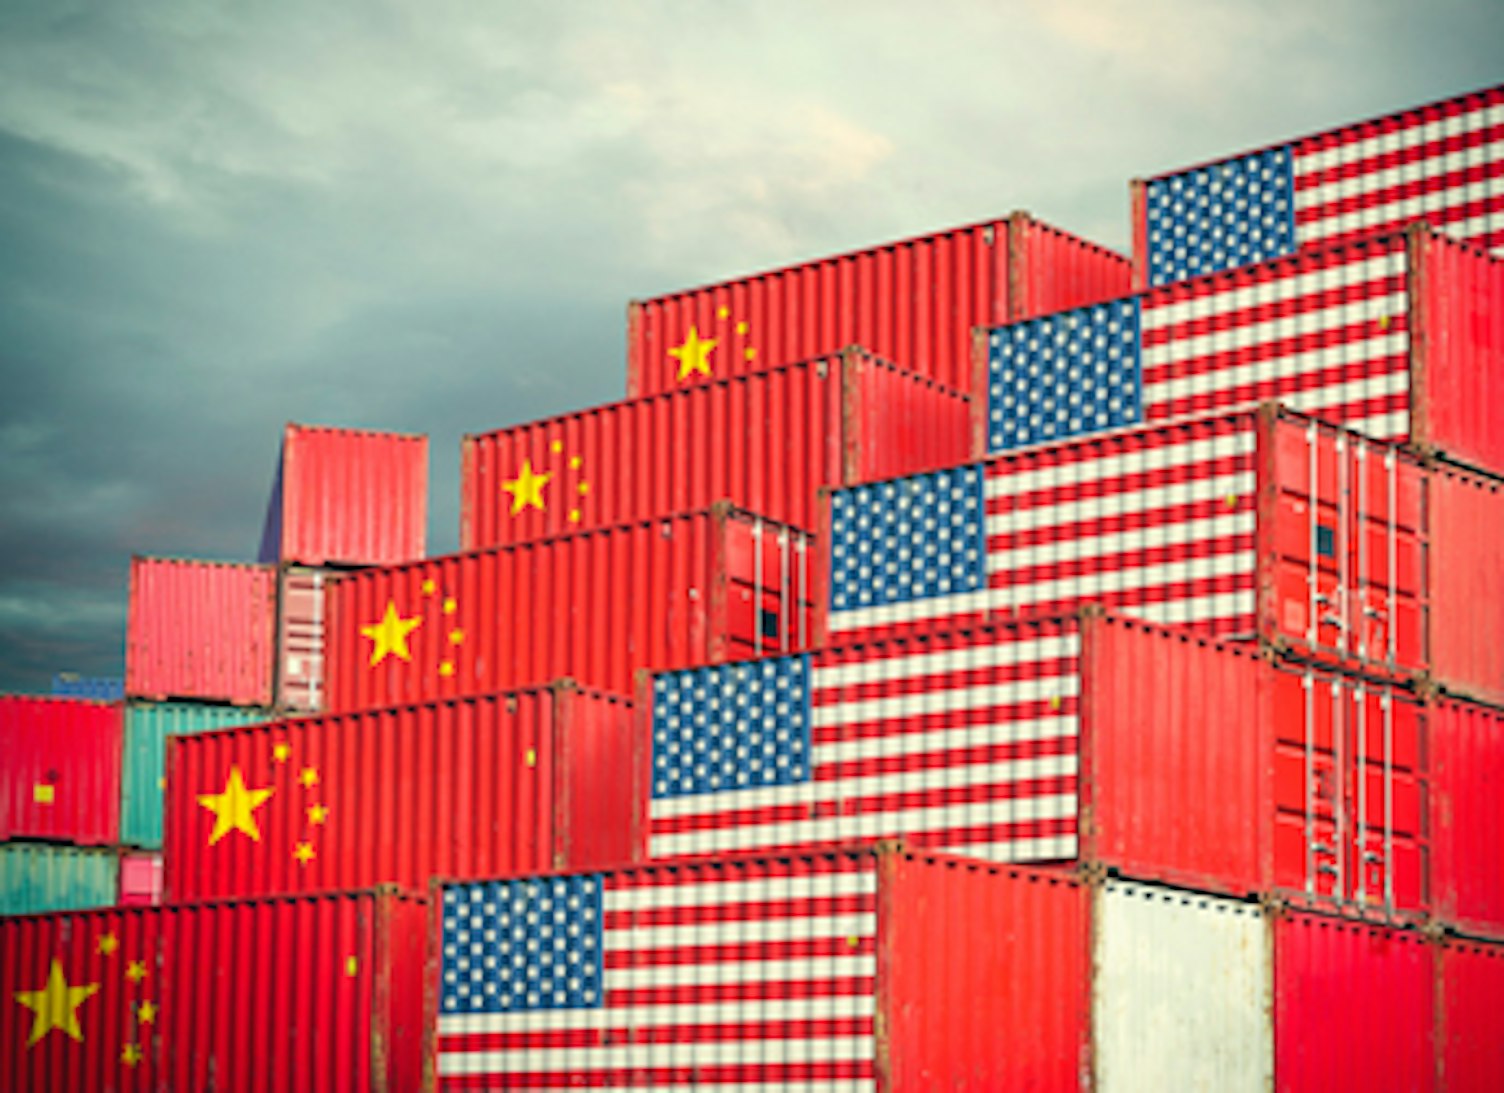 Chinese and USA Cargo Containers Reflecting Trade War and Restriction in Export and Import